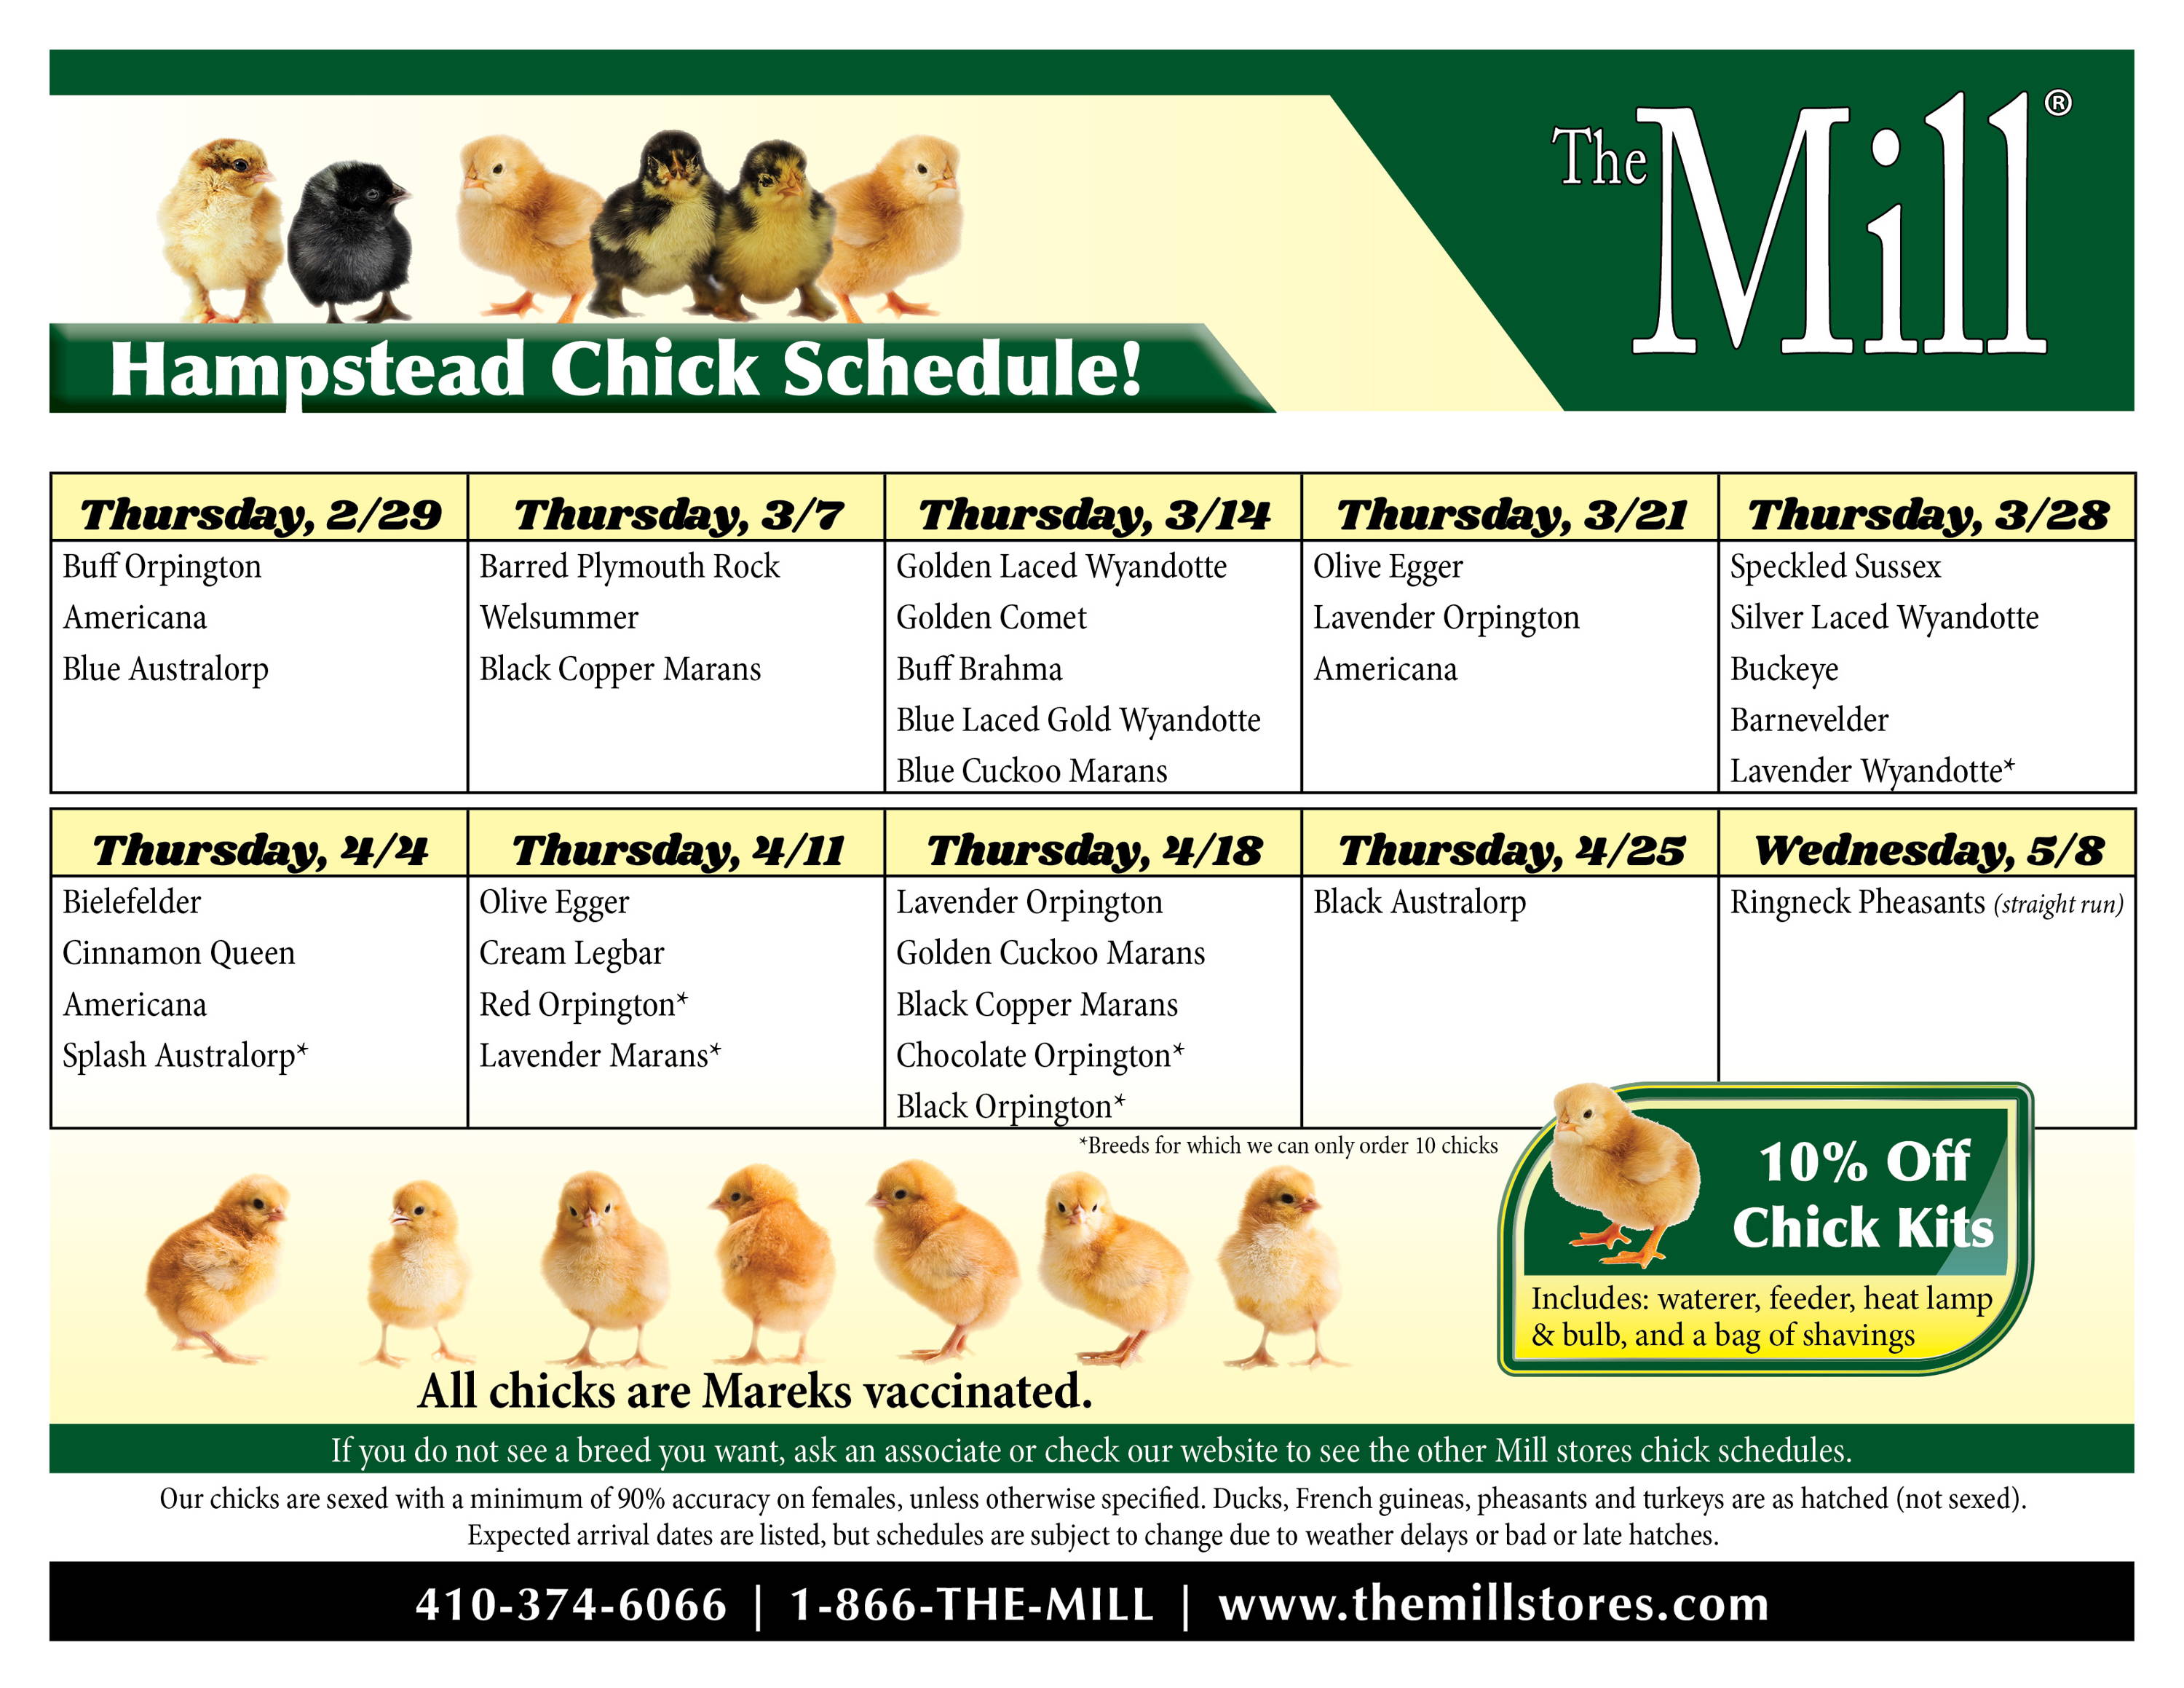 The Mill of Hampstead chick schedule 2024